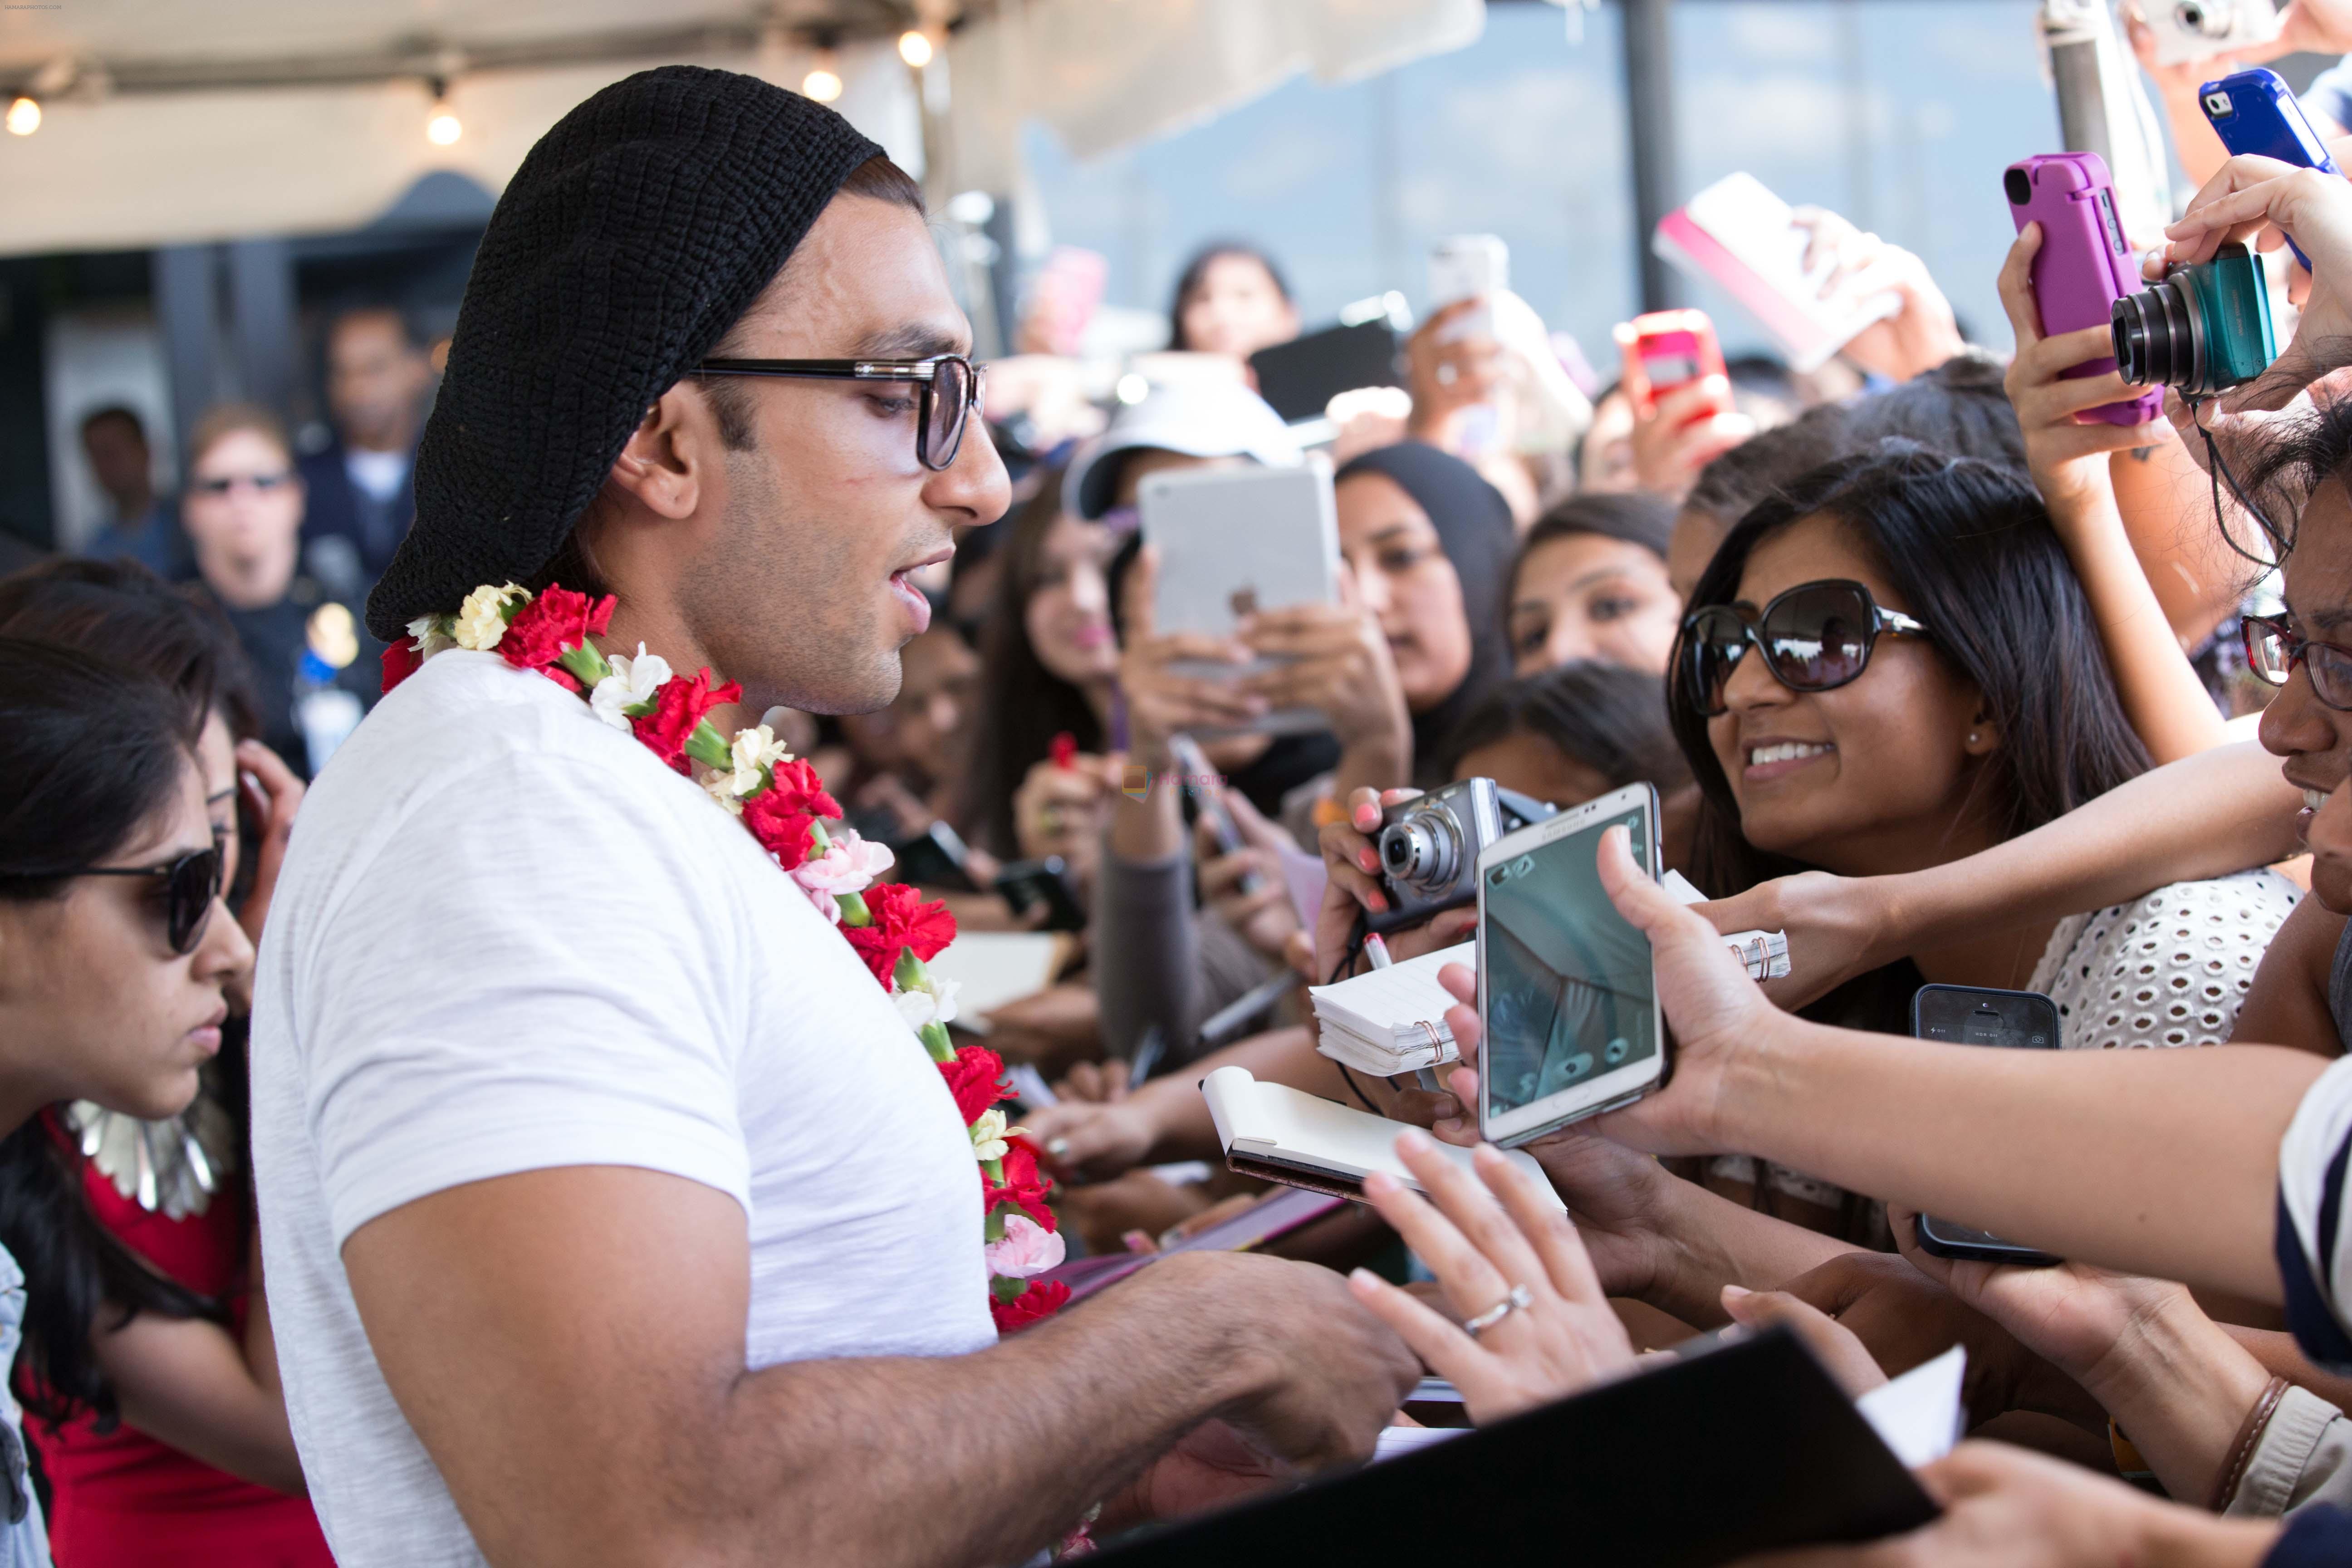 Ranveer Singh arrives at Tampa International Airpot on 25th April 2014 for IIFA